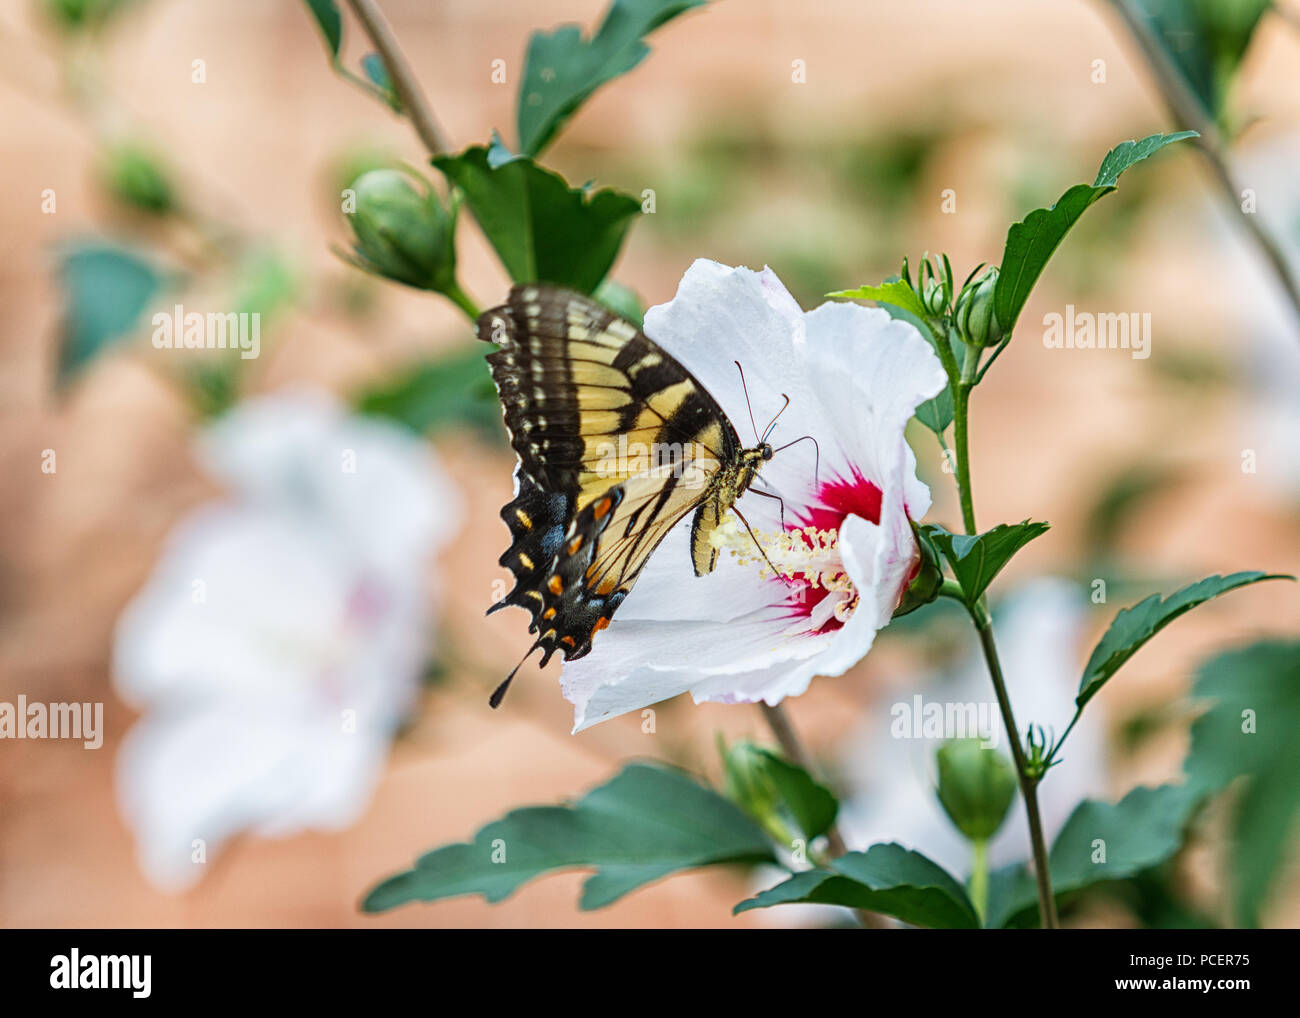 Eastern Tiger Swallowtail Butterfly On a Rose von Sharon Blume. Stockfoto